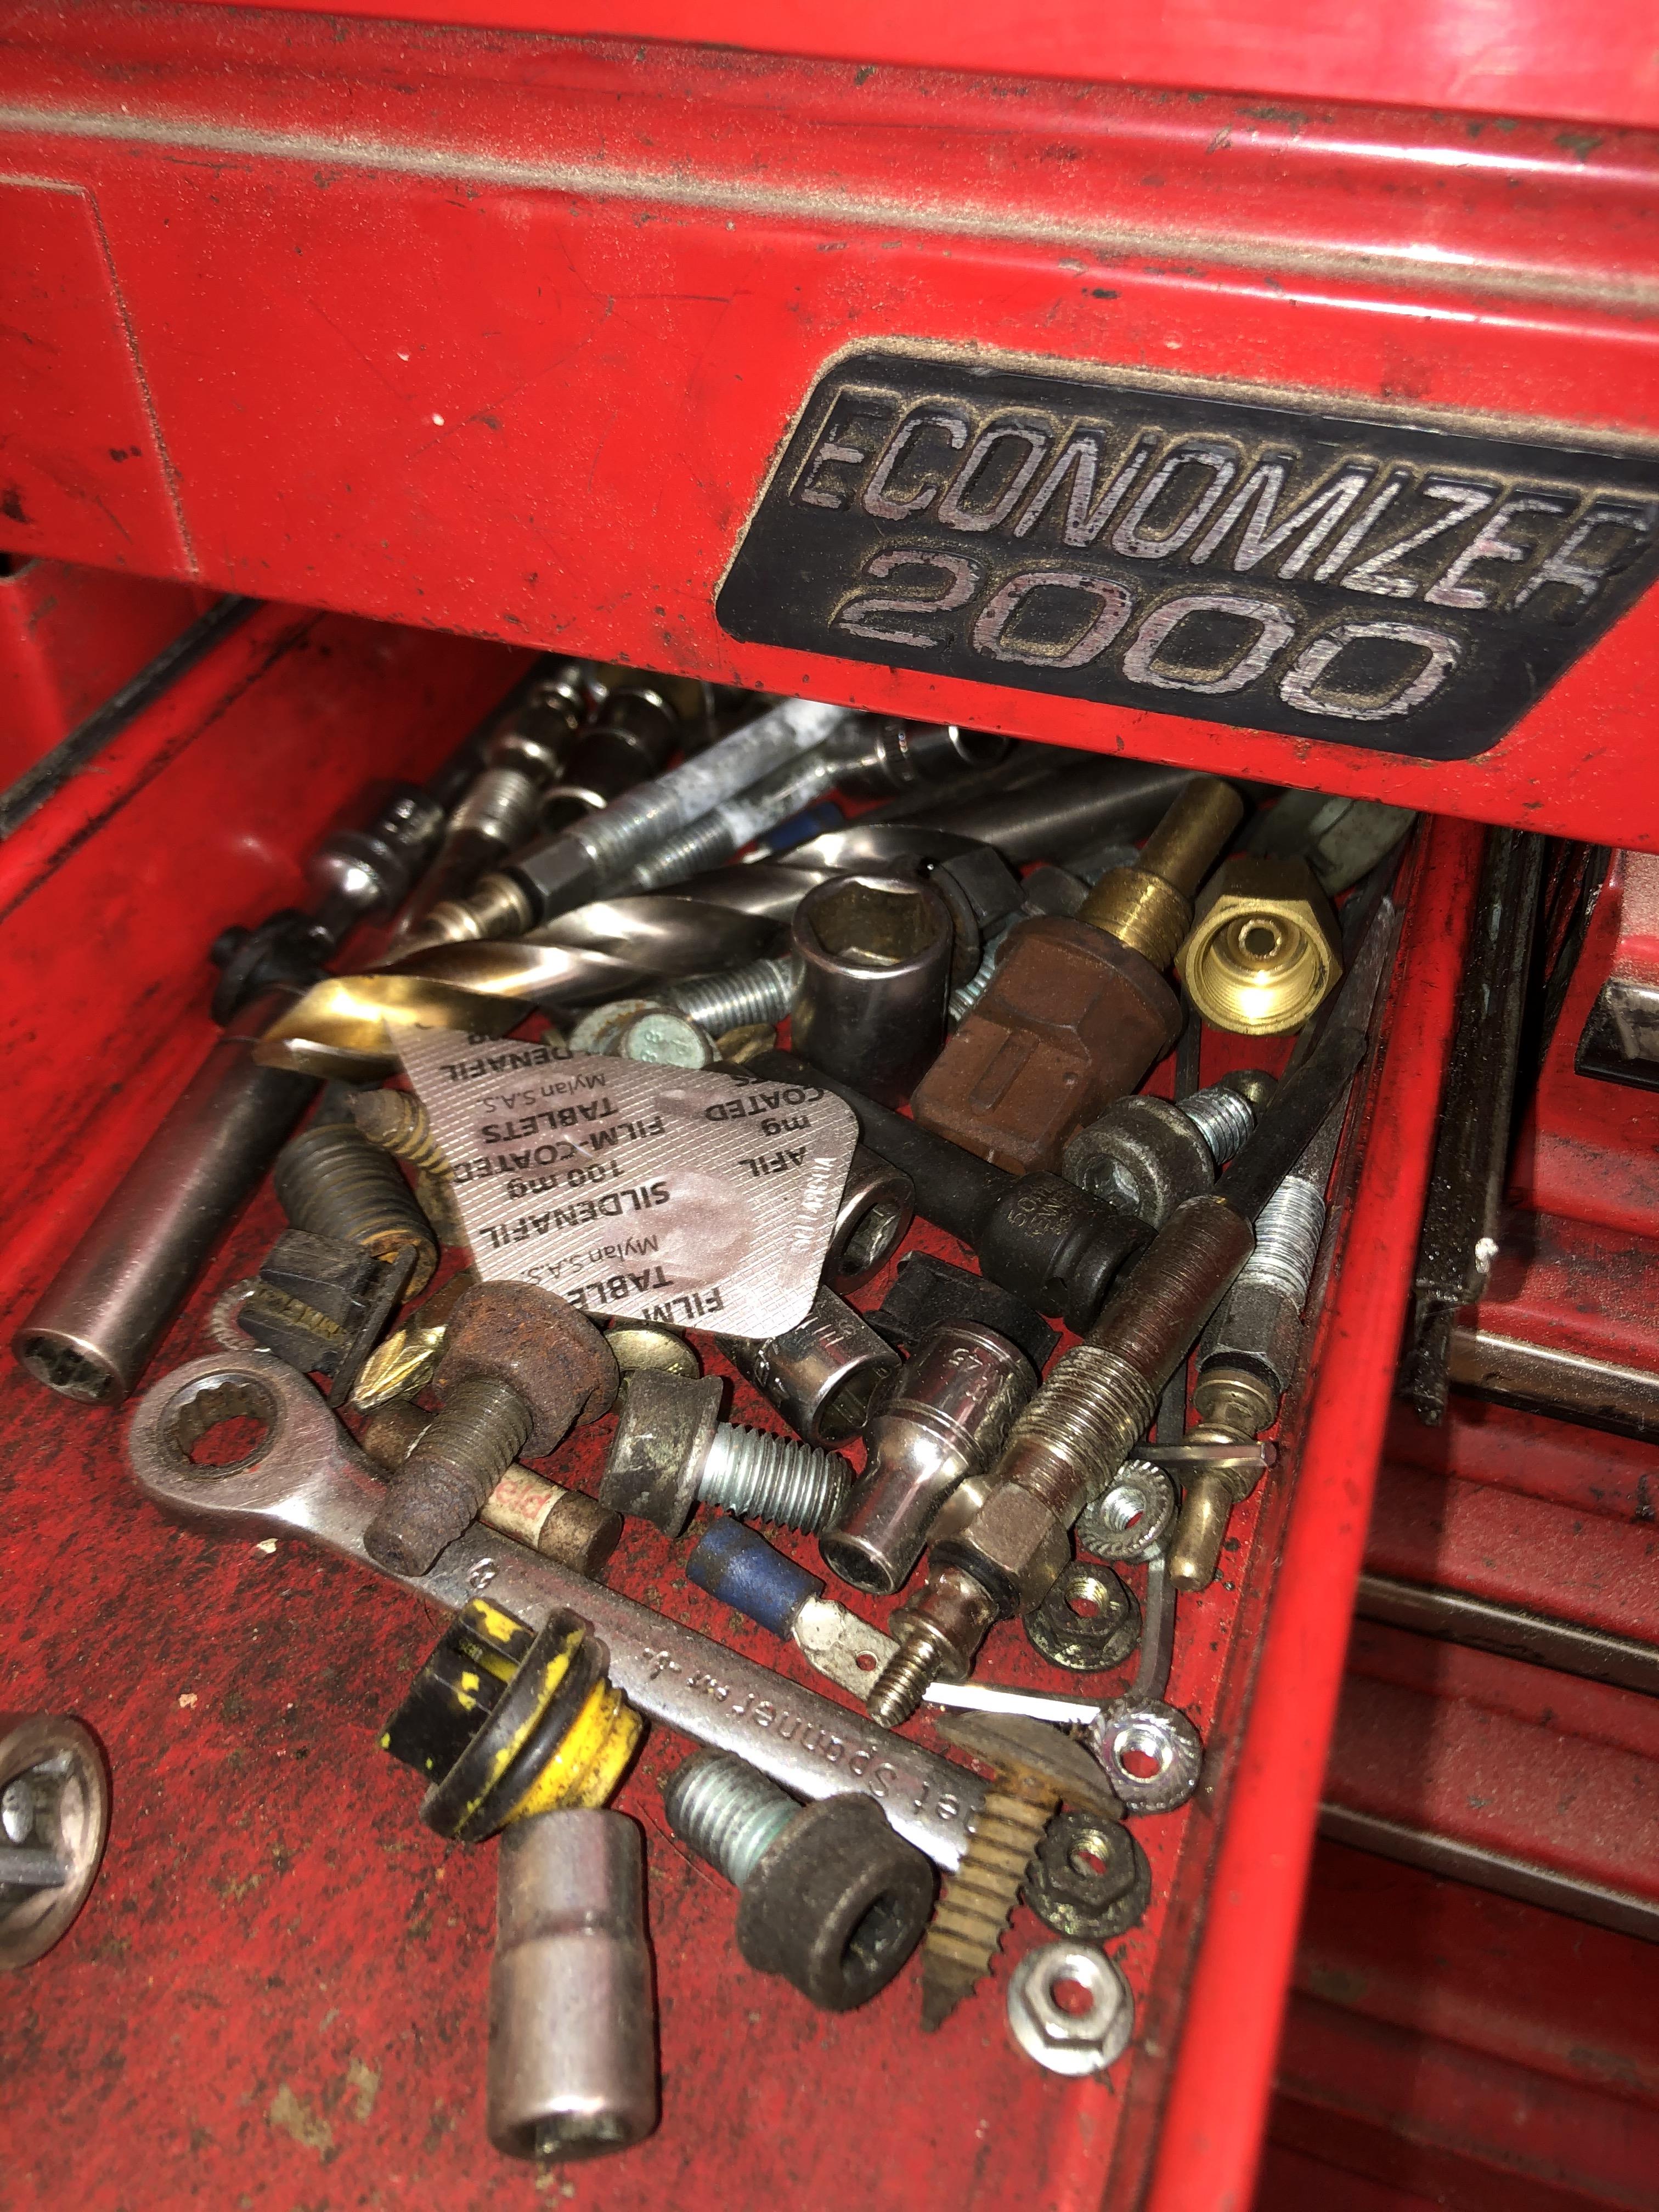 RED MAC TOOLS MECHANICS MOBILE CABINET CONTAINING ASSORTED TOOLS, RING SPANNERS, WRENCHES, - Image 5 of 7